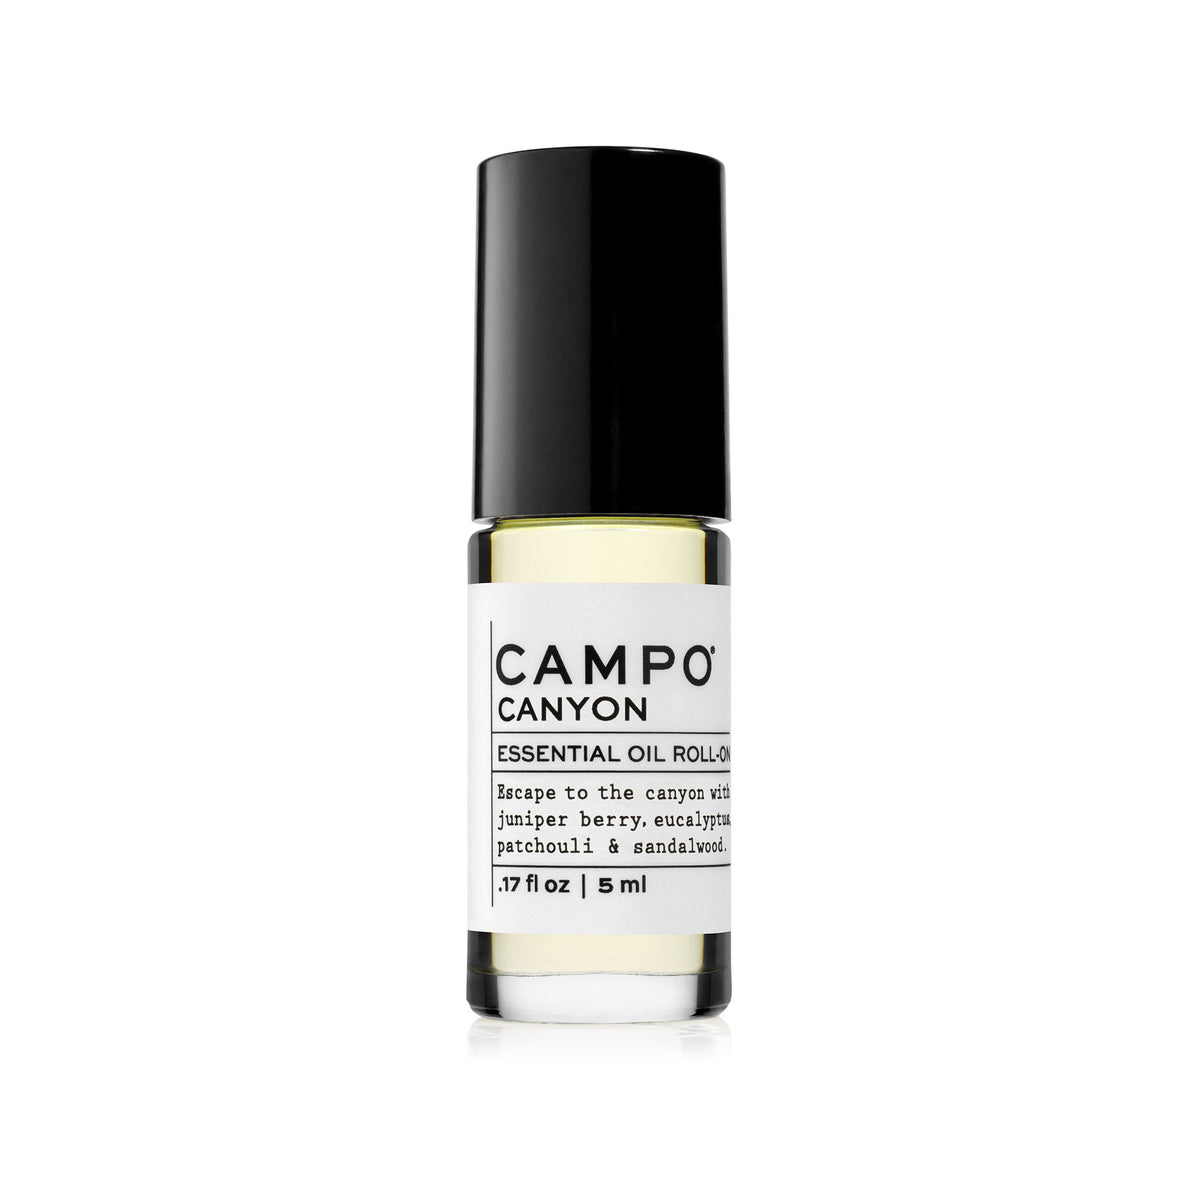 WOODS Beauty Essential Oil CANYON Roll-On in 5 ml. Escape to the canyon with this 100% pure essential oil blend of juniper berry, patchouli, eucalyptus radiate, and sandalwood. Inspired by hikes through rustling eucalyptus, juniper berry &amp; patchouli-filled mountains.